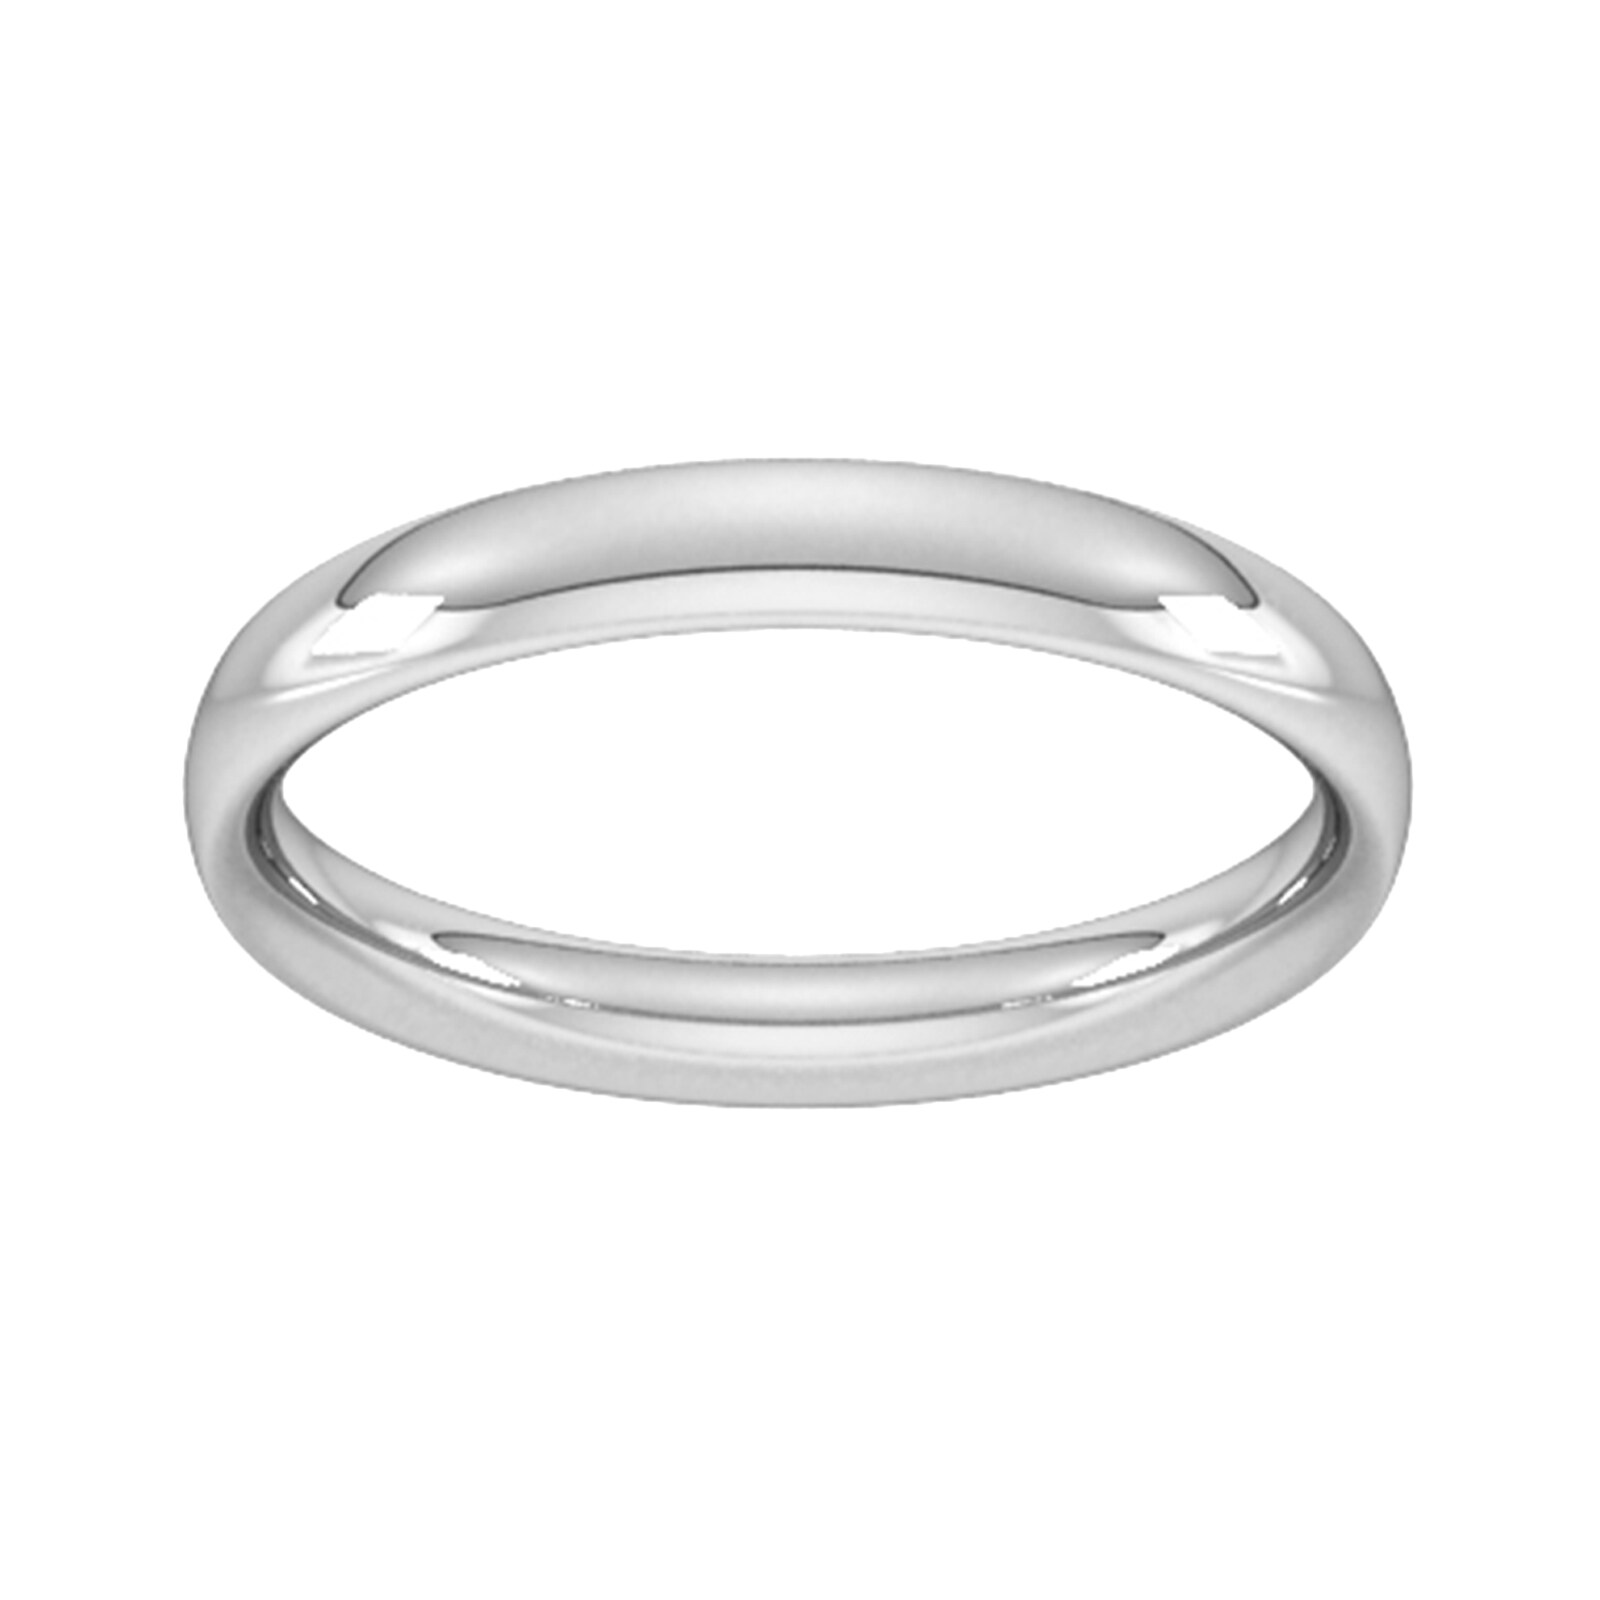 3mm Traditional Court Heavy Wedding Ring In 950 Palladium - Ring Size Q